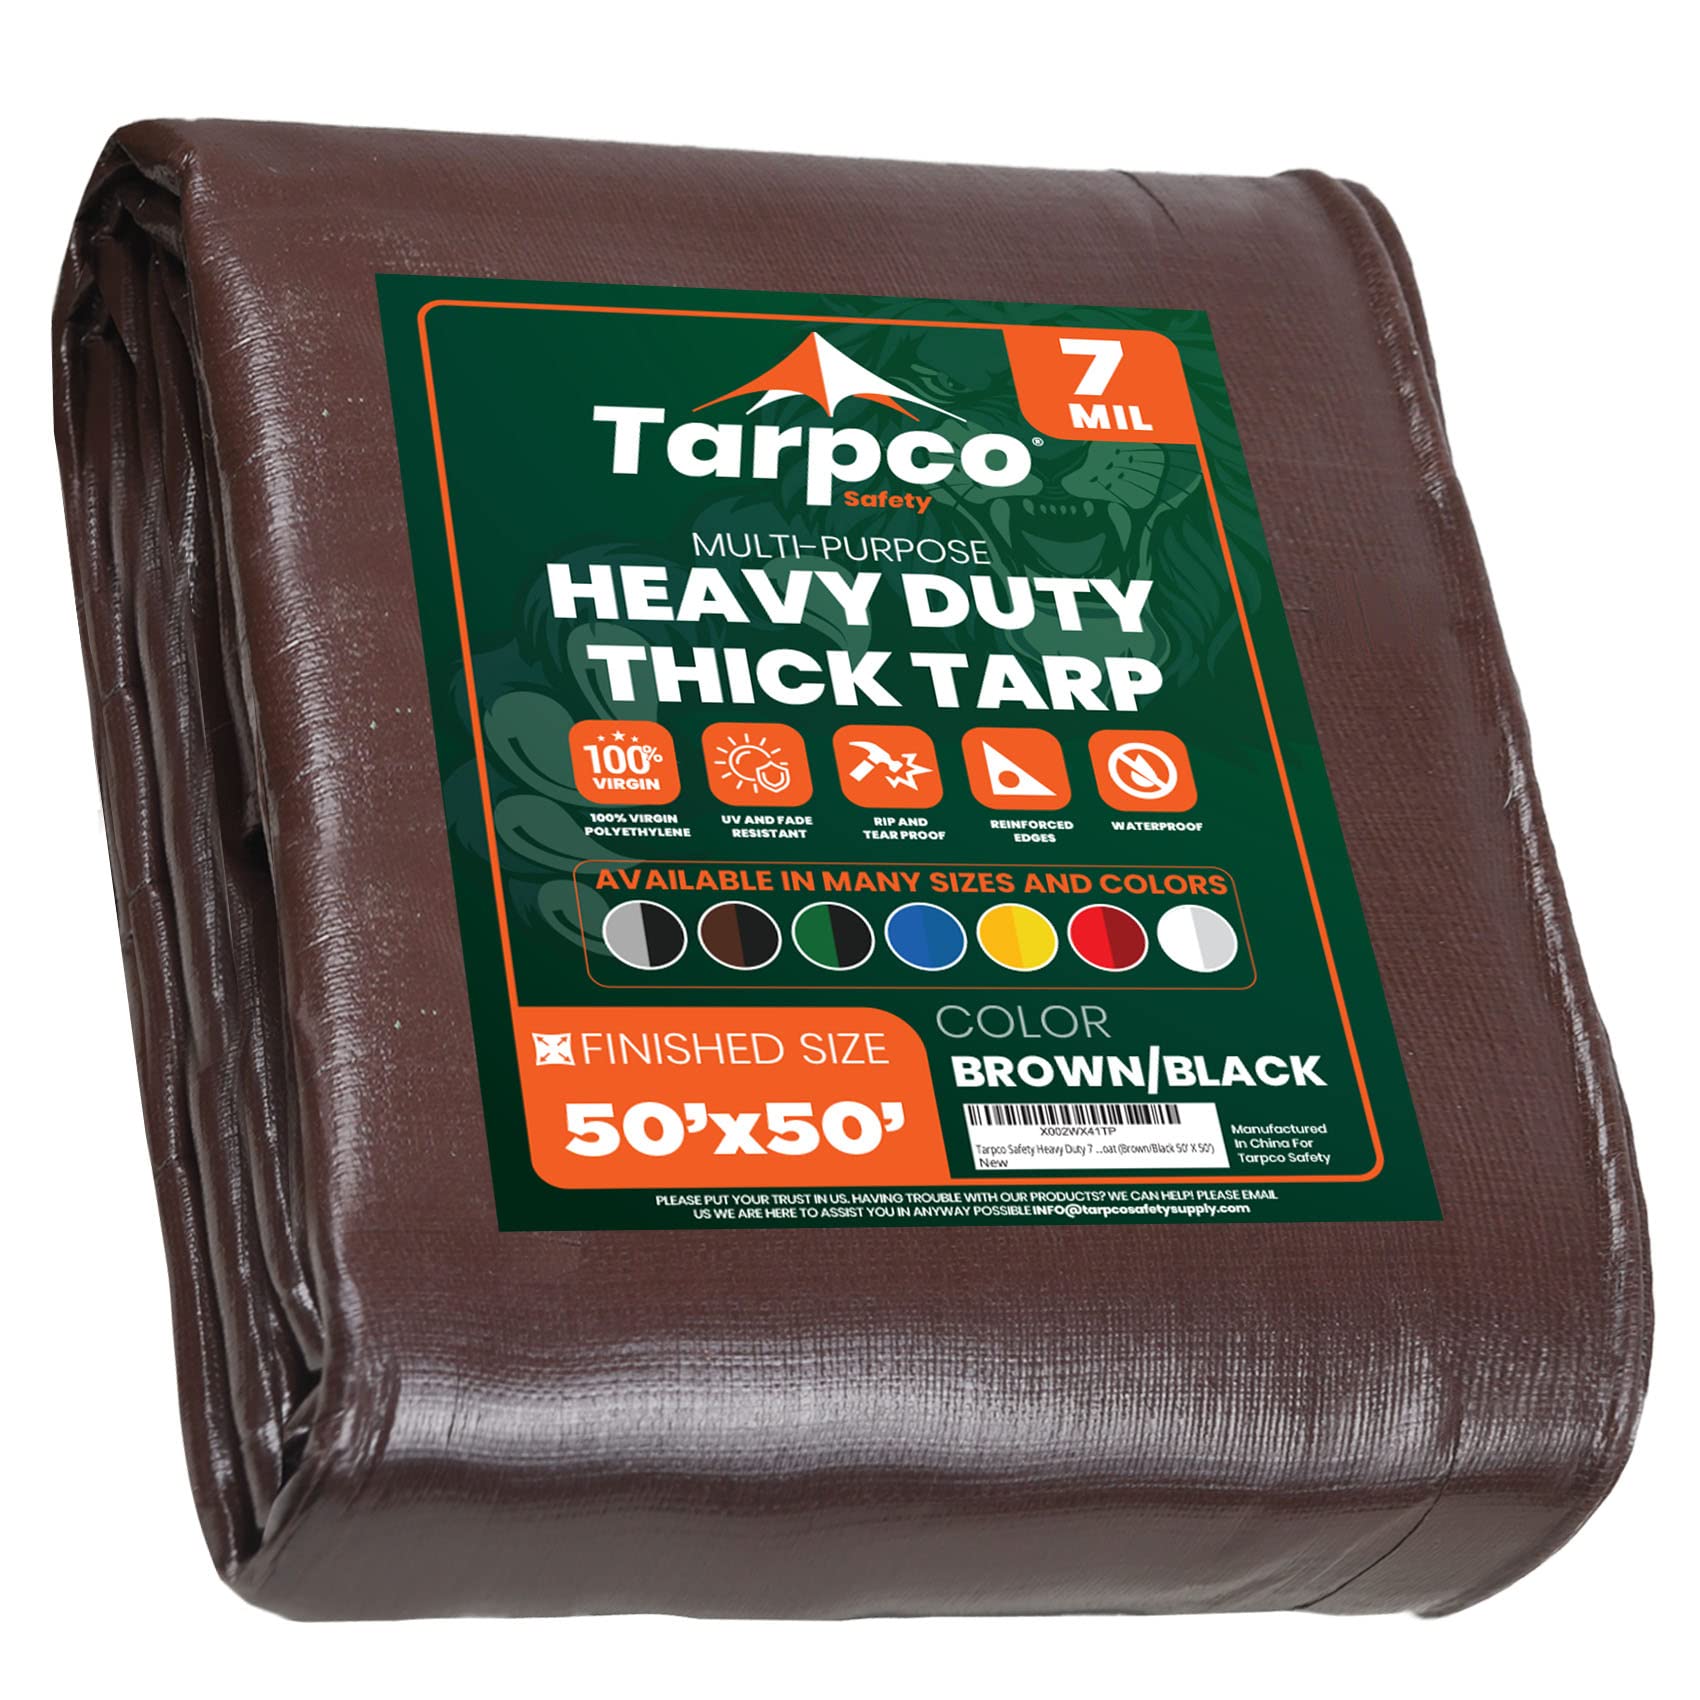 Tarpco Safety Heavy Duty 7 Mil Tarp cover, Waterproof, UV Resistant, Rip and Tear Proof, Poly Tarpaulin with Reinforced Edges fo